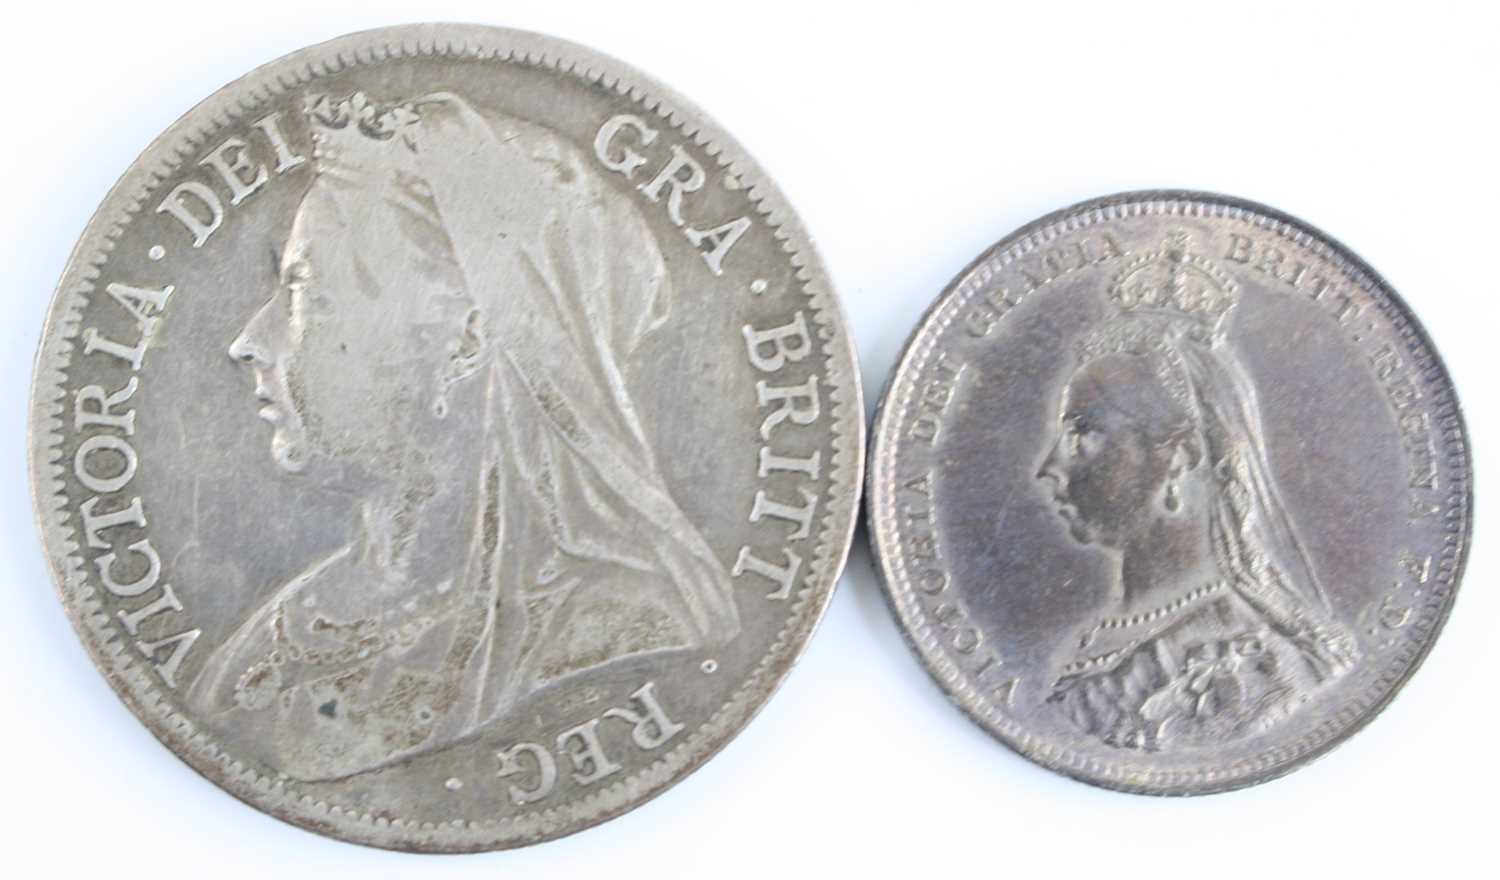 Great Britain, 1887 shilling, Victoria jubilee bust, rev: crowned quartered shield within garter and